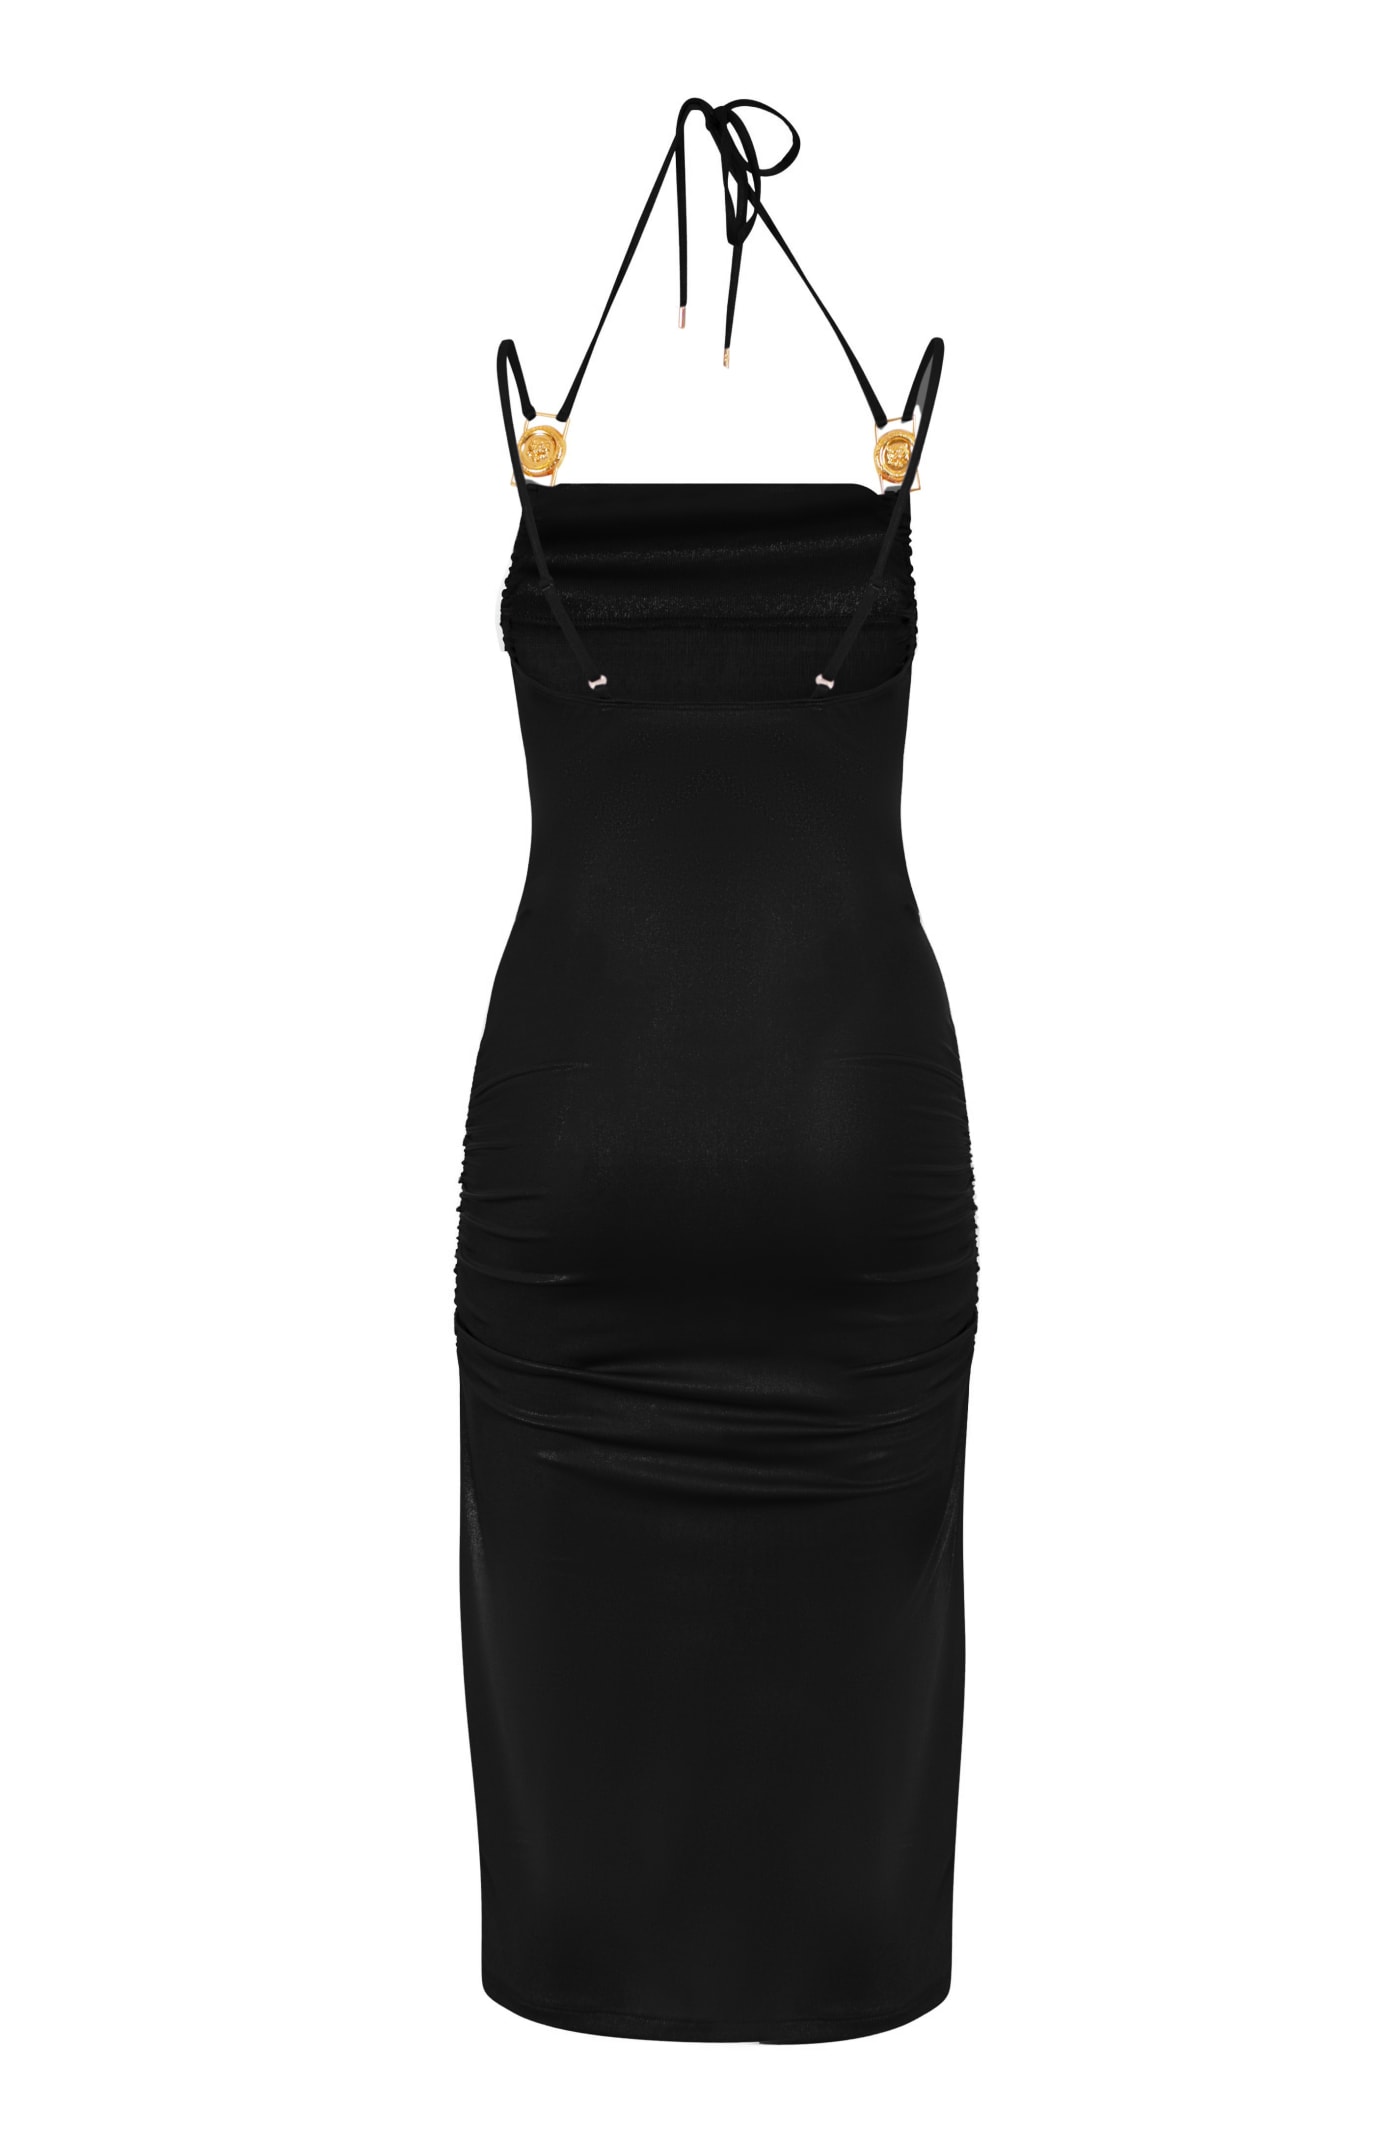 Fitted Pencil Dress.